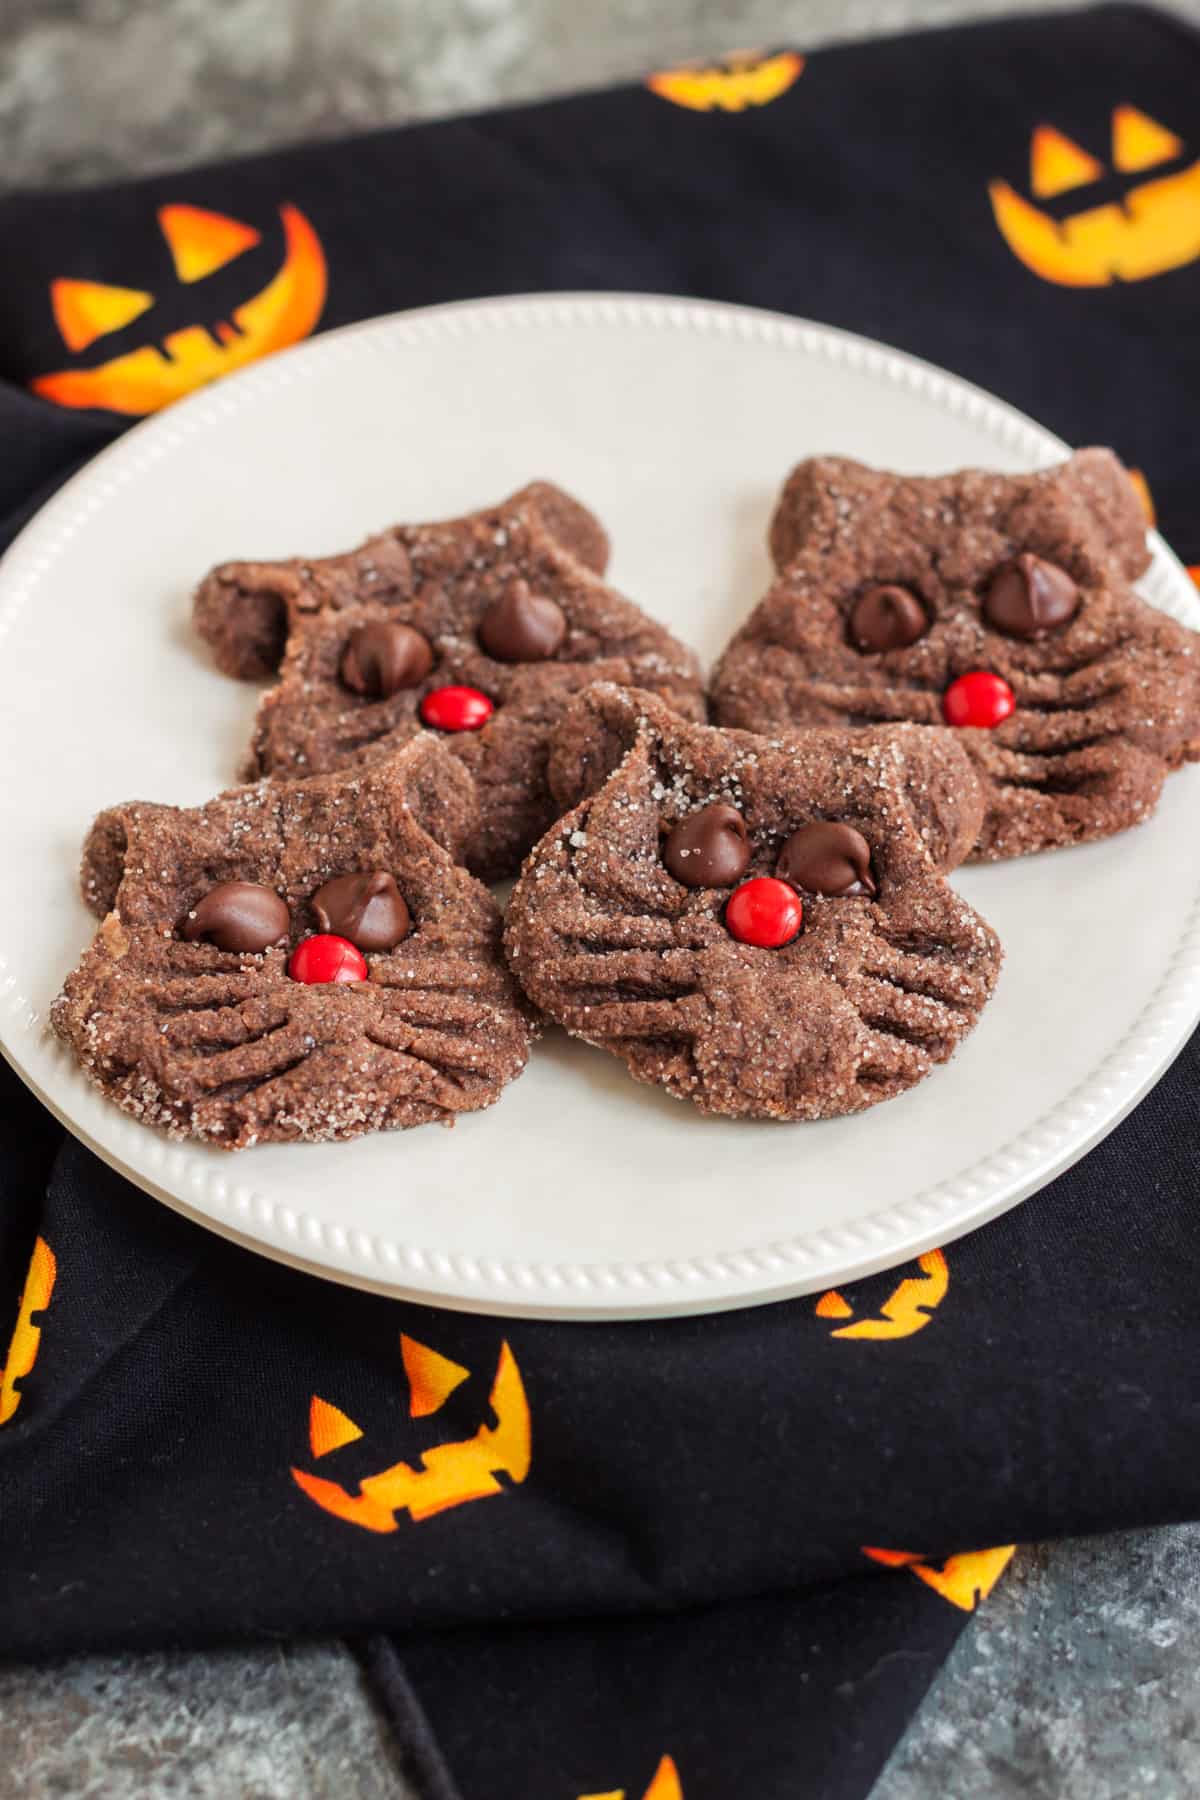 White plate of chocolate cookies shaped like a black cat face with chocolate chip eyes and red candy nose on a black and yellow jack-o-lantern napkin background. 